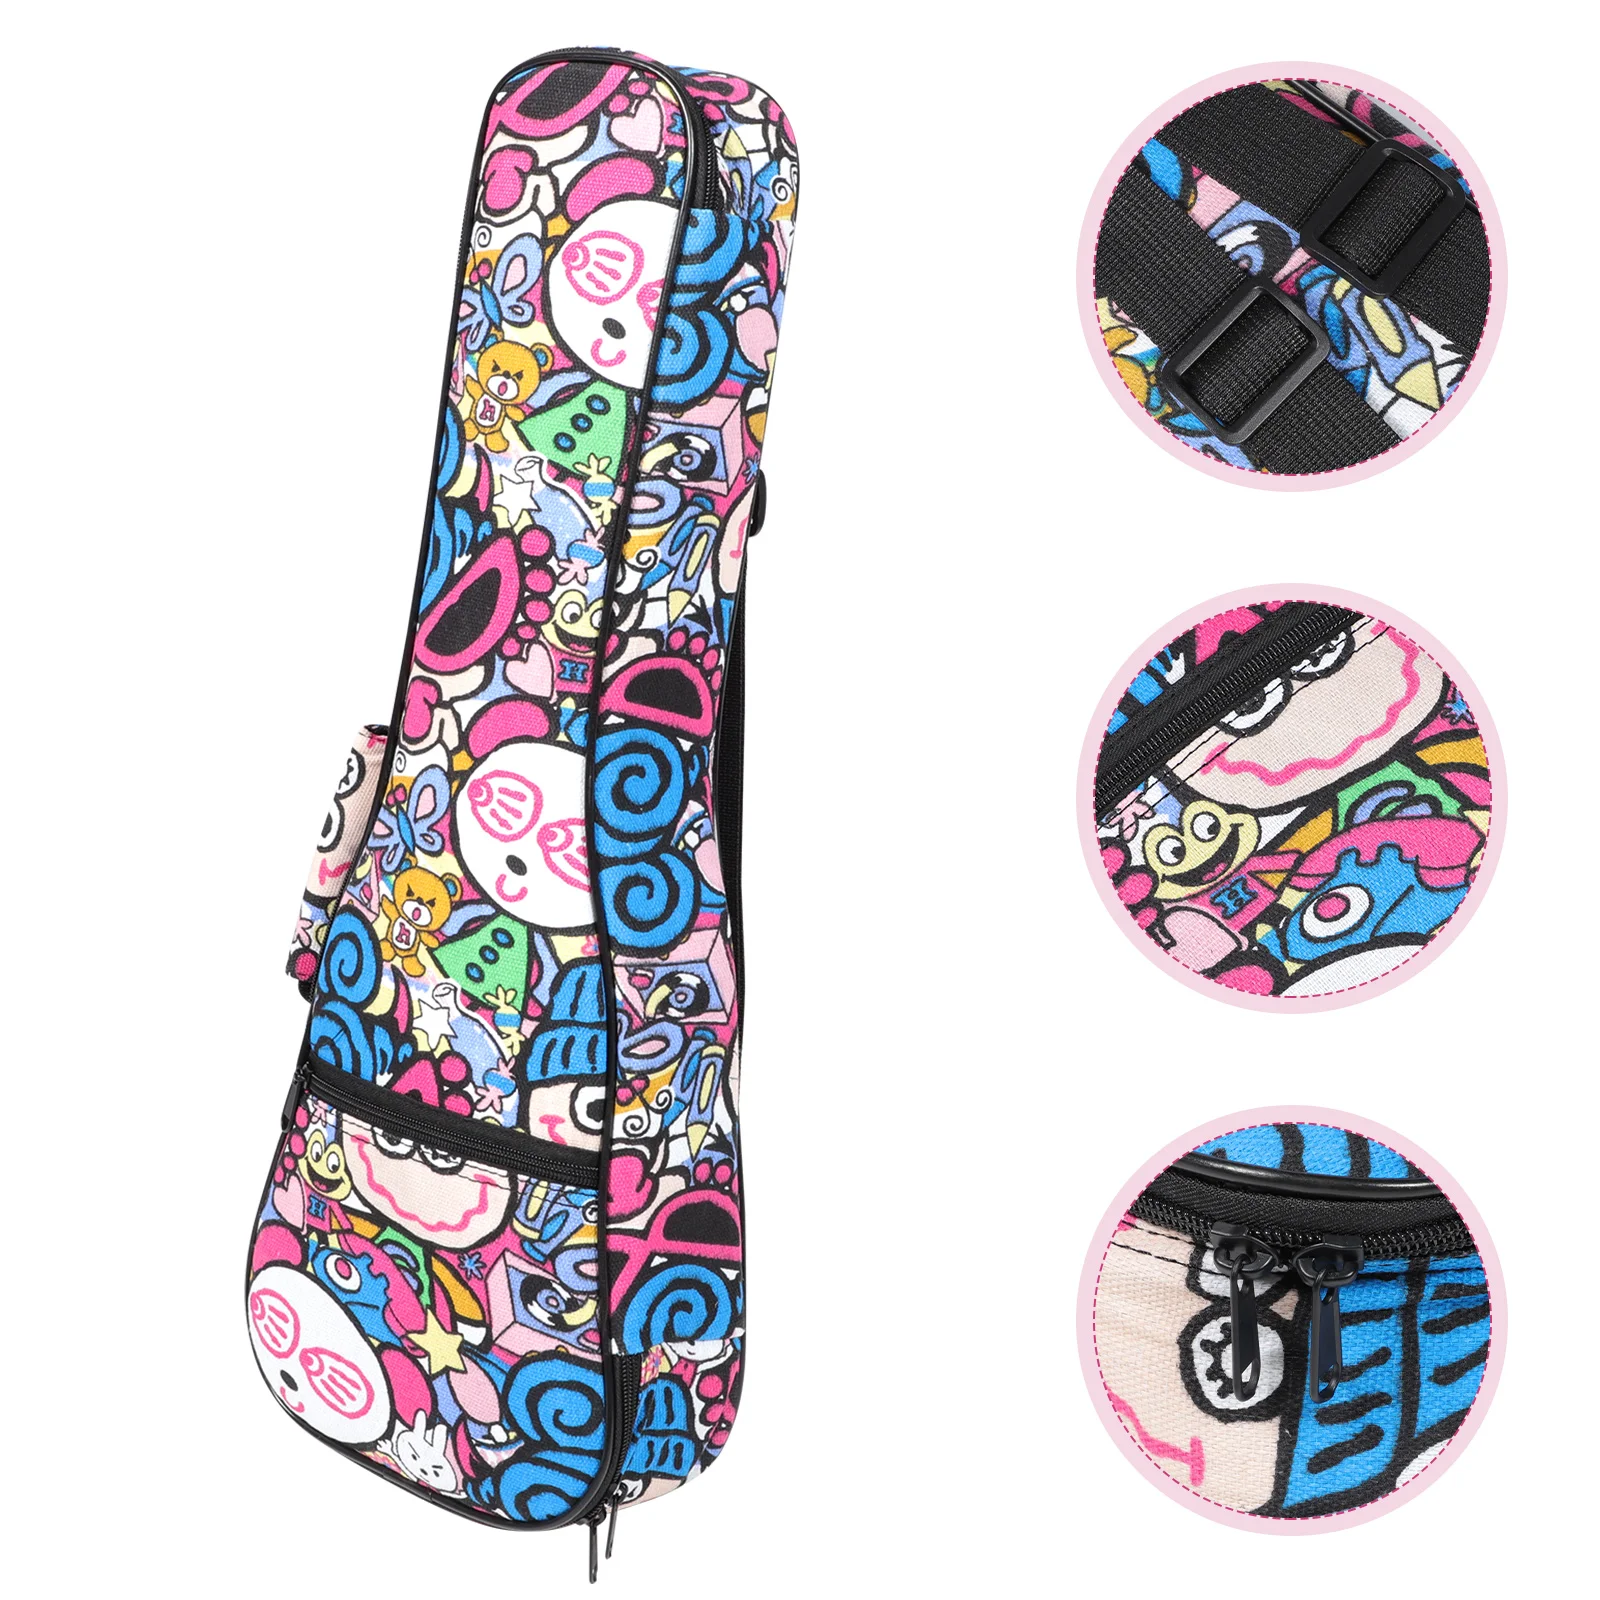 

Guitar Bag Tote Acoustic Case Ukulele Storage Container Practical Plastic Supply Portable